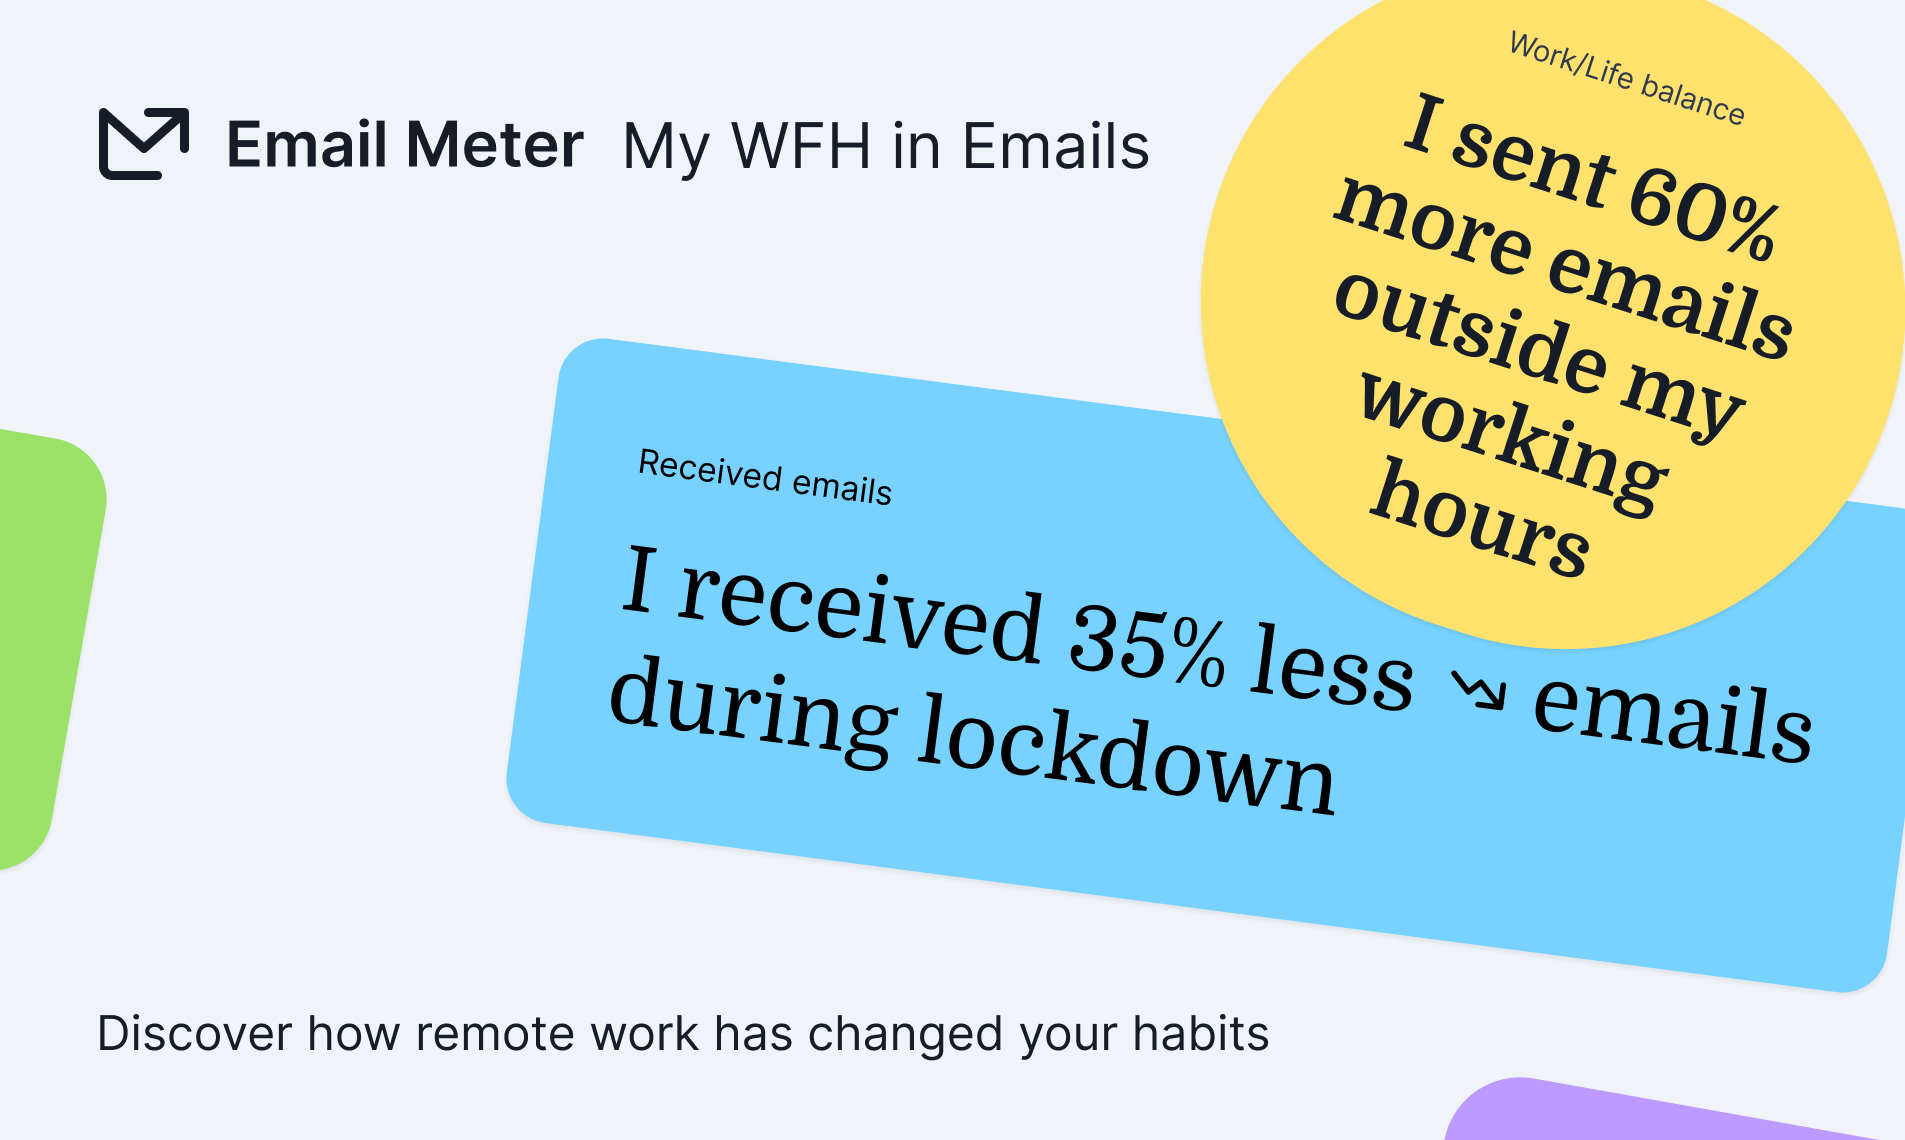 Find detailed information about My WFH in Emails